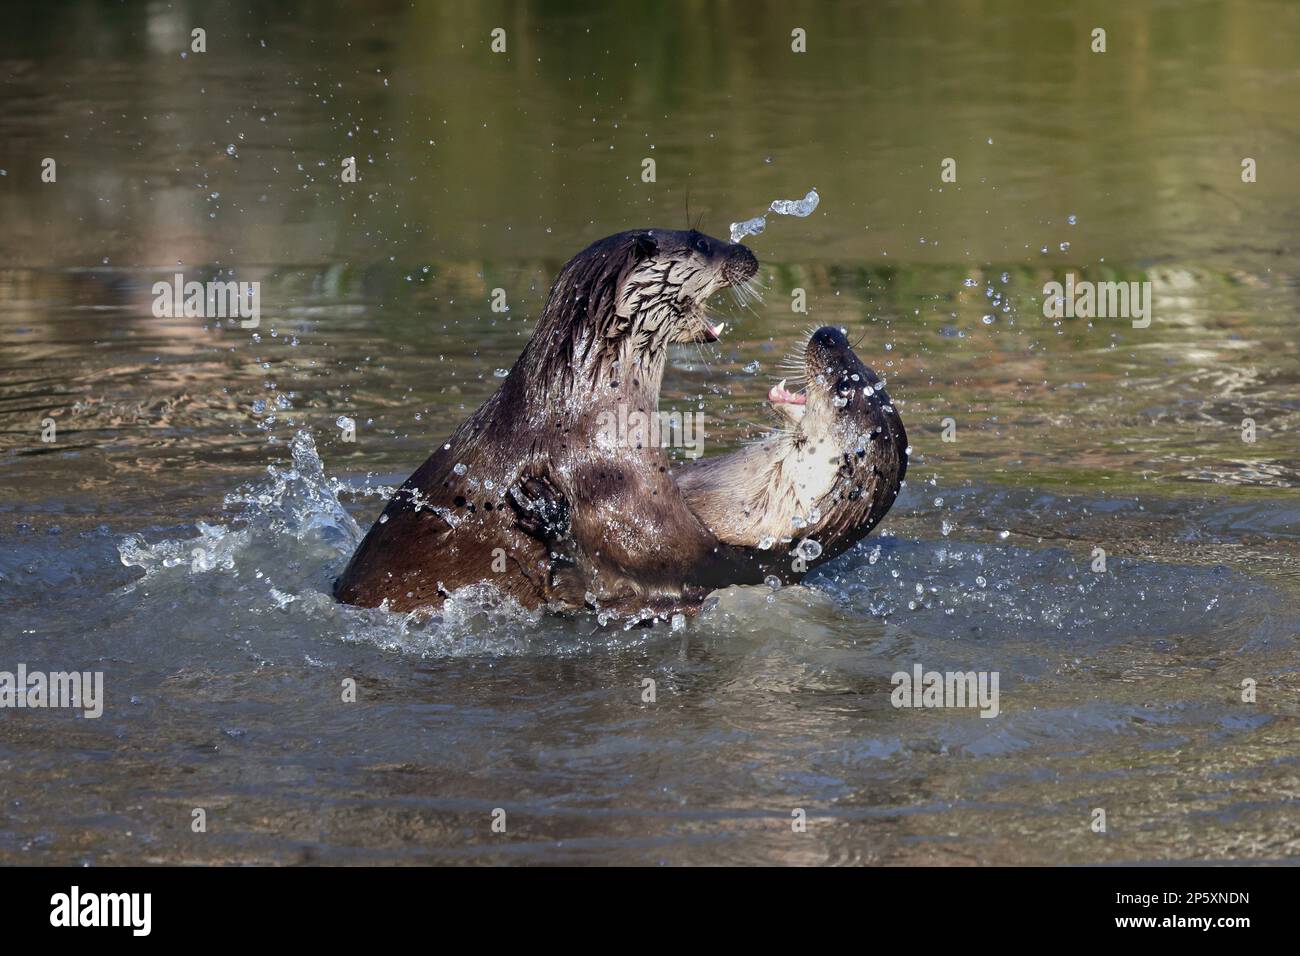 European river otter, European Otter, Eurasian Otter (Lutra lutra), two otters romping in the water, side view, Germany Stock Photo